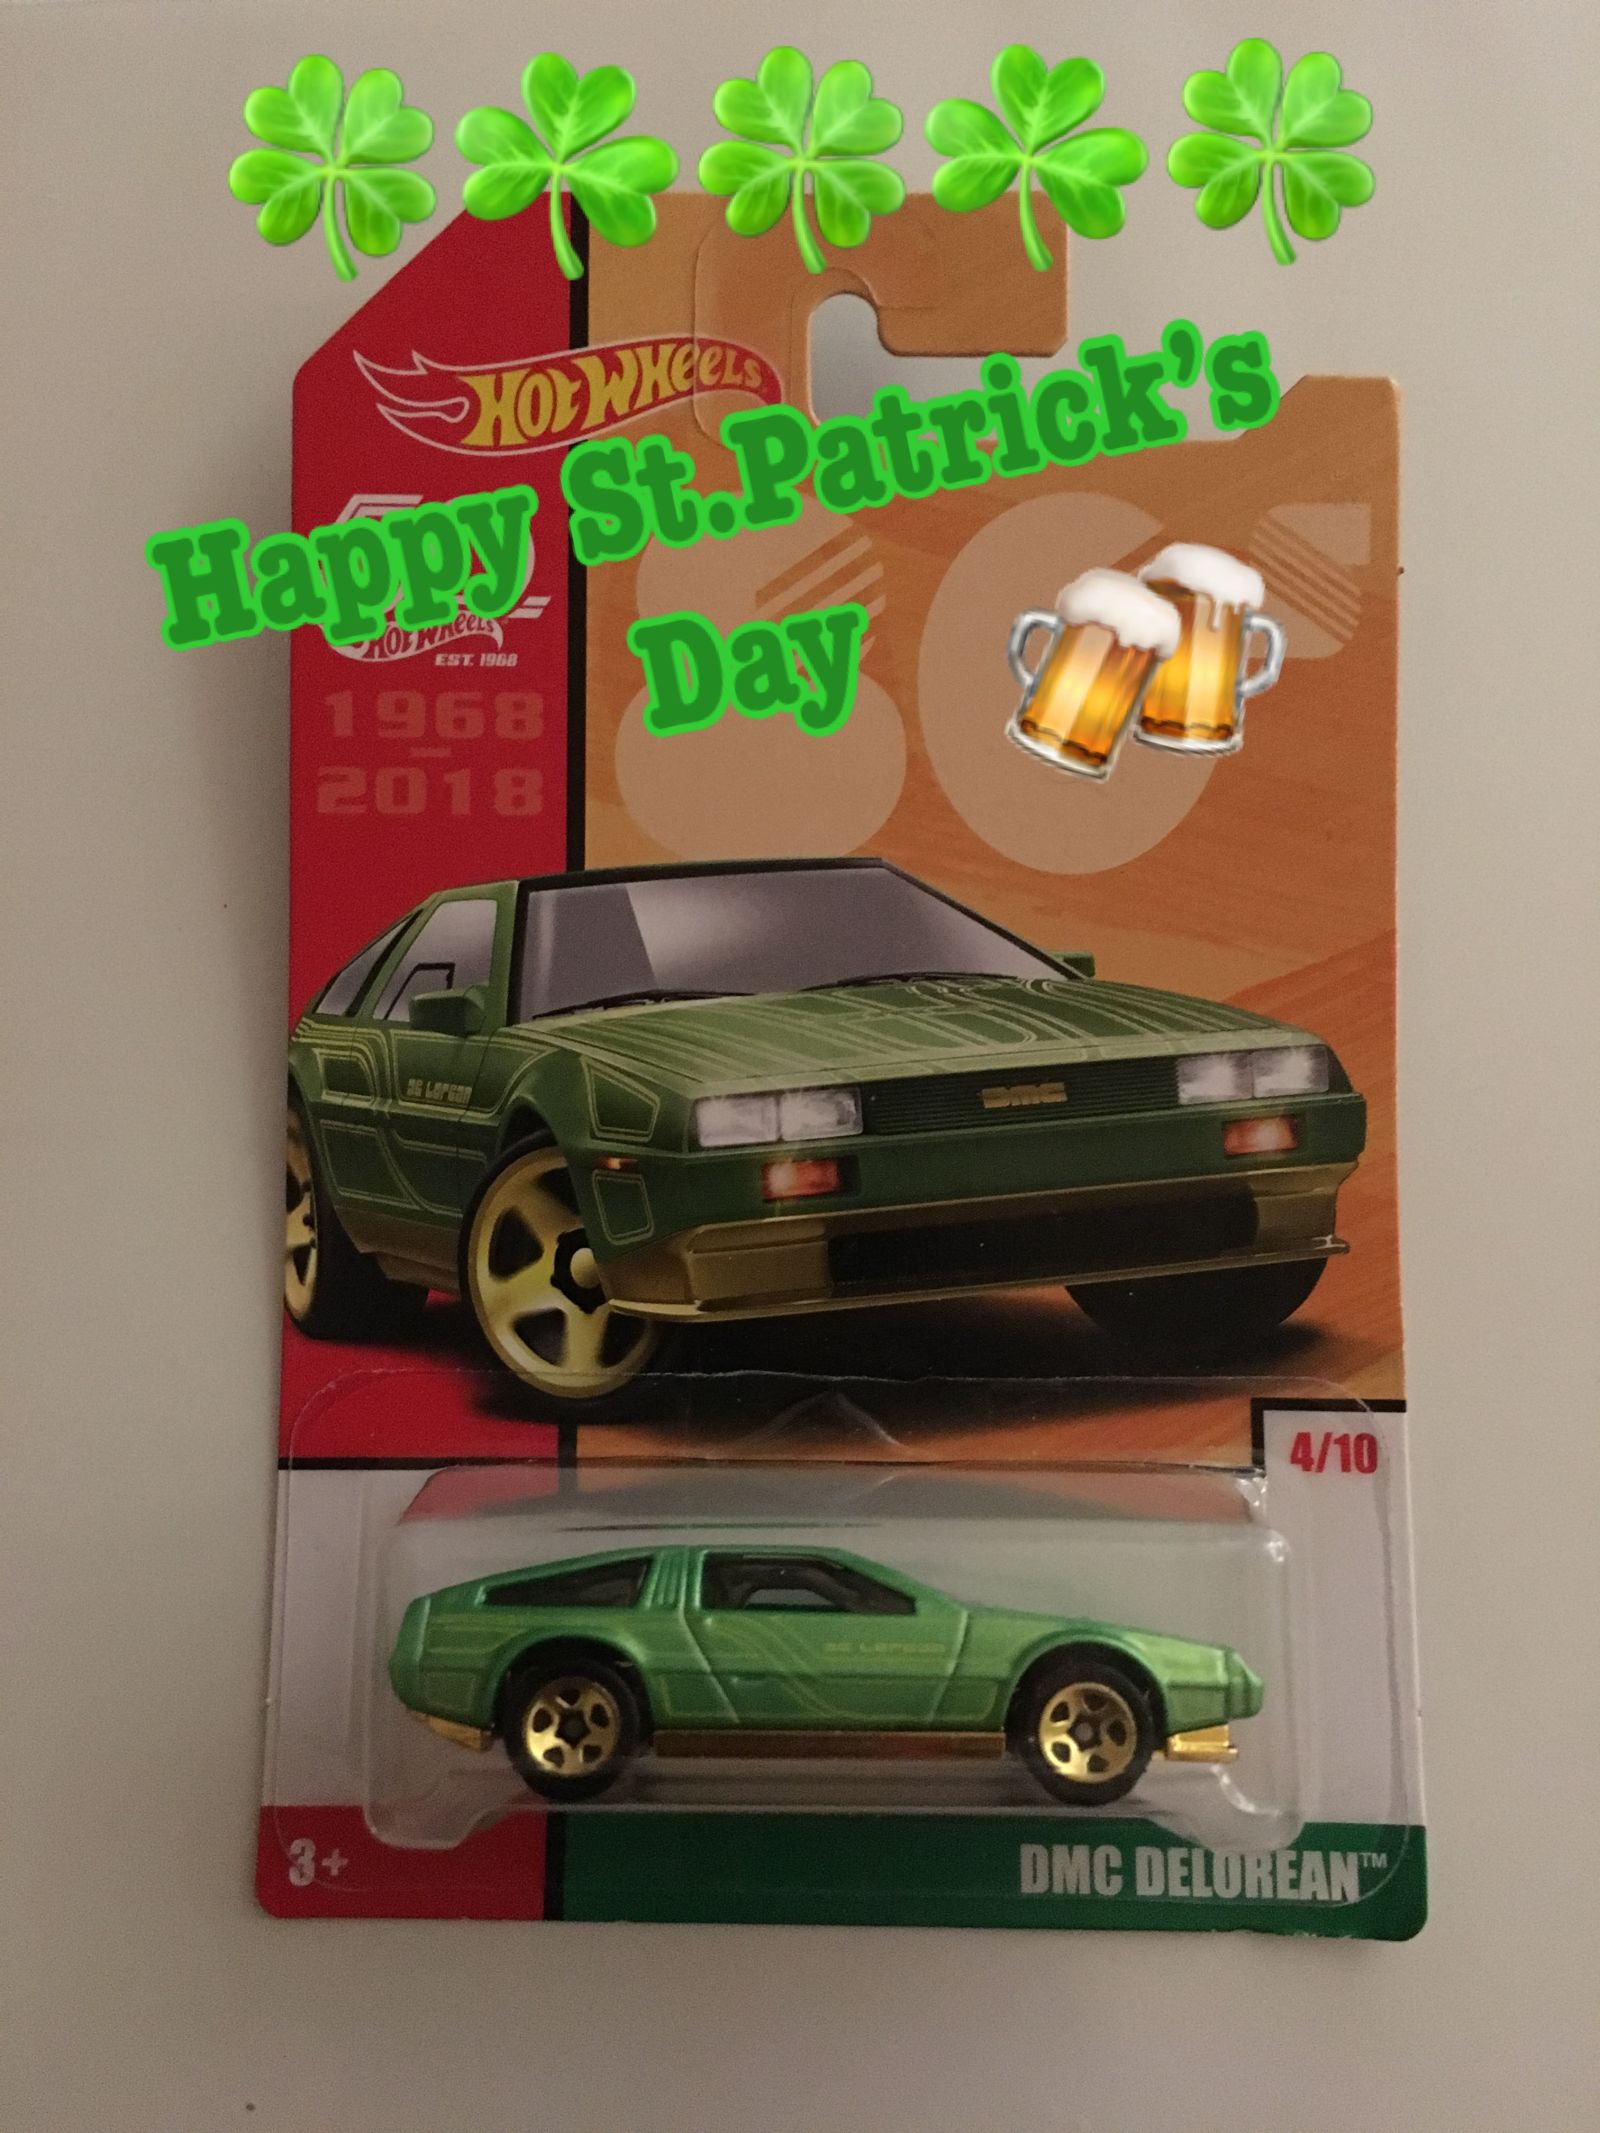 Illustration for article titled Unofficial St. Patrick’s Day car